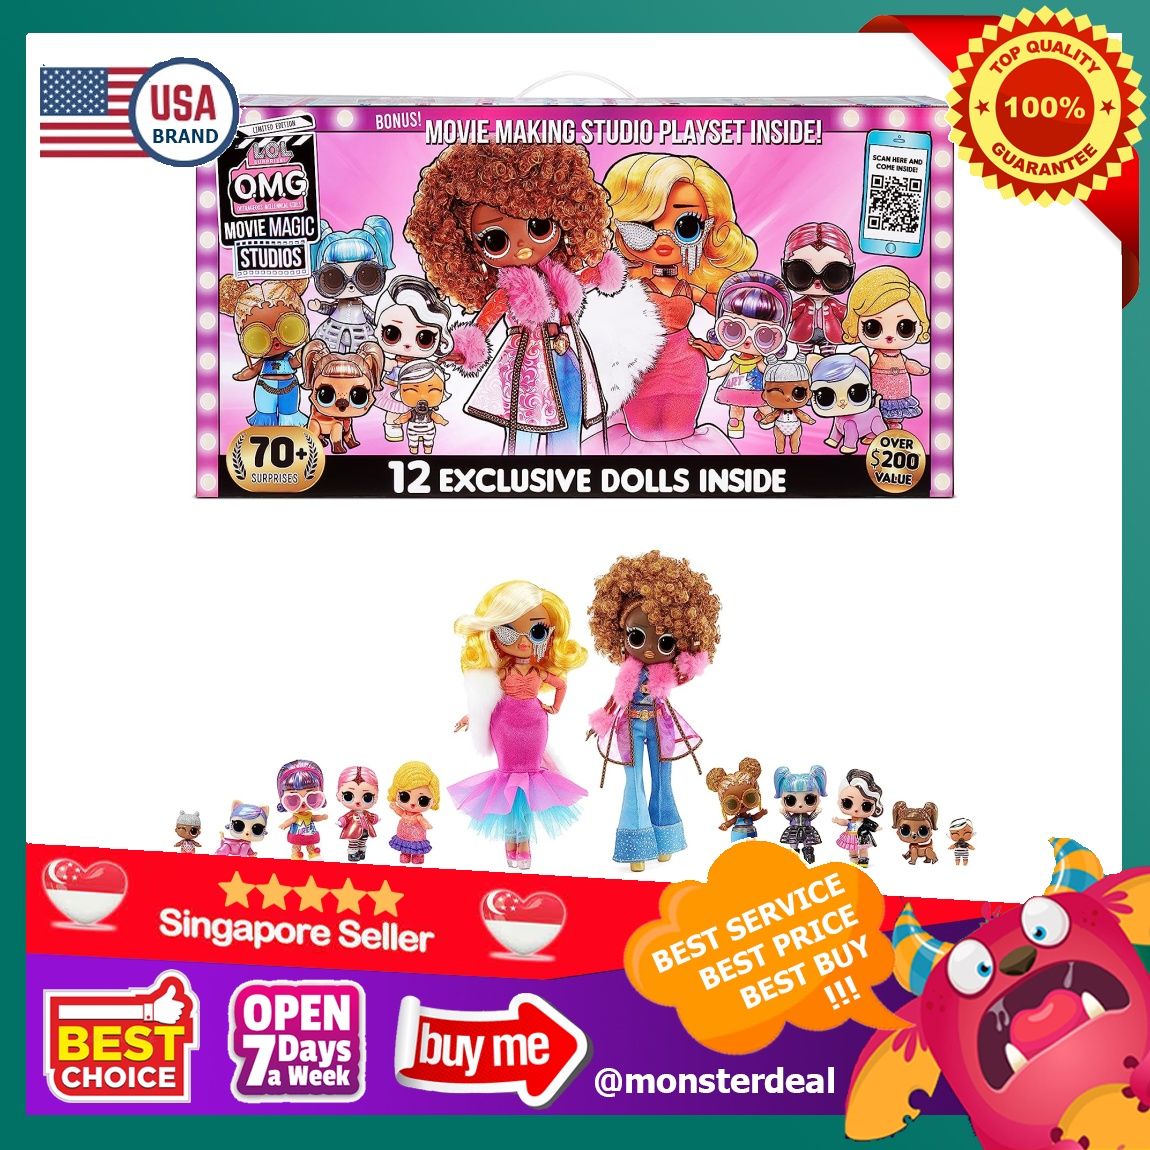 L.O.L. Surprise! OMG Movie Magic Studios With 70 Surprises 12 Doll Playset  - 576532 for sale online